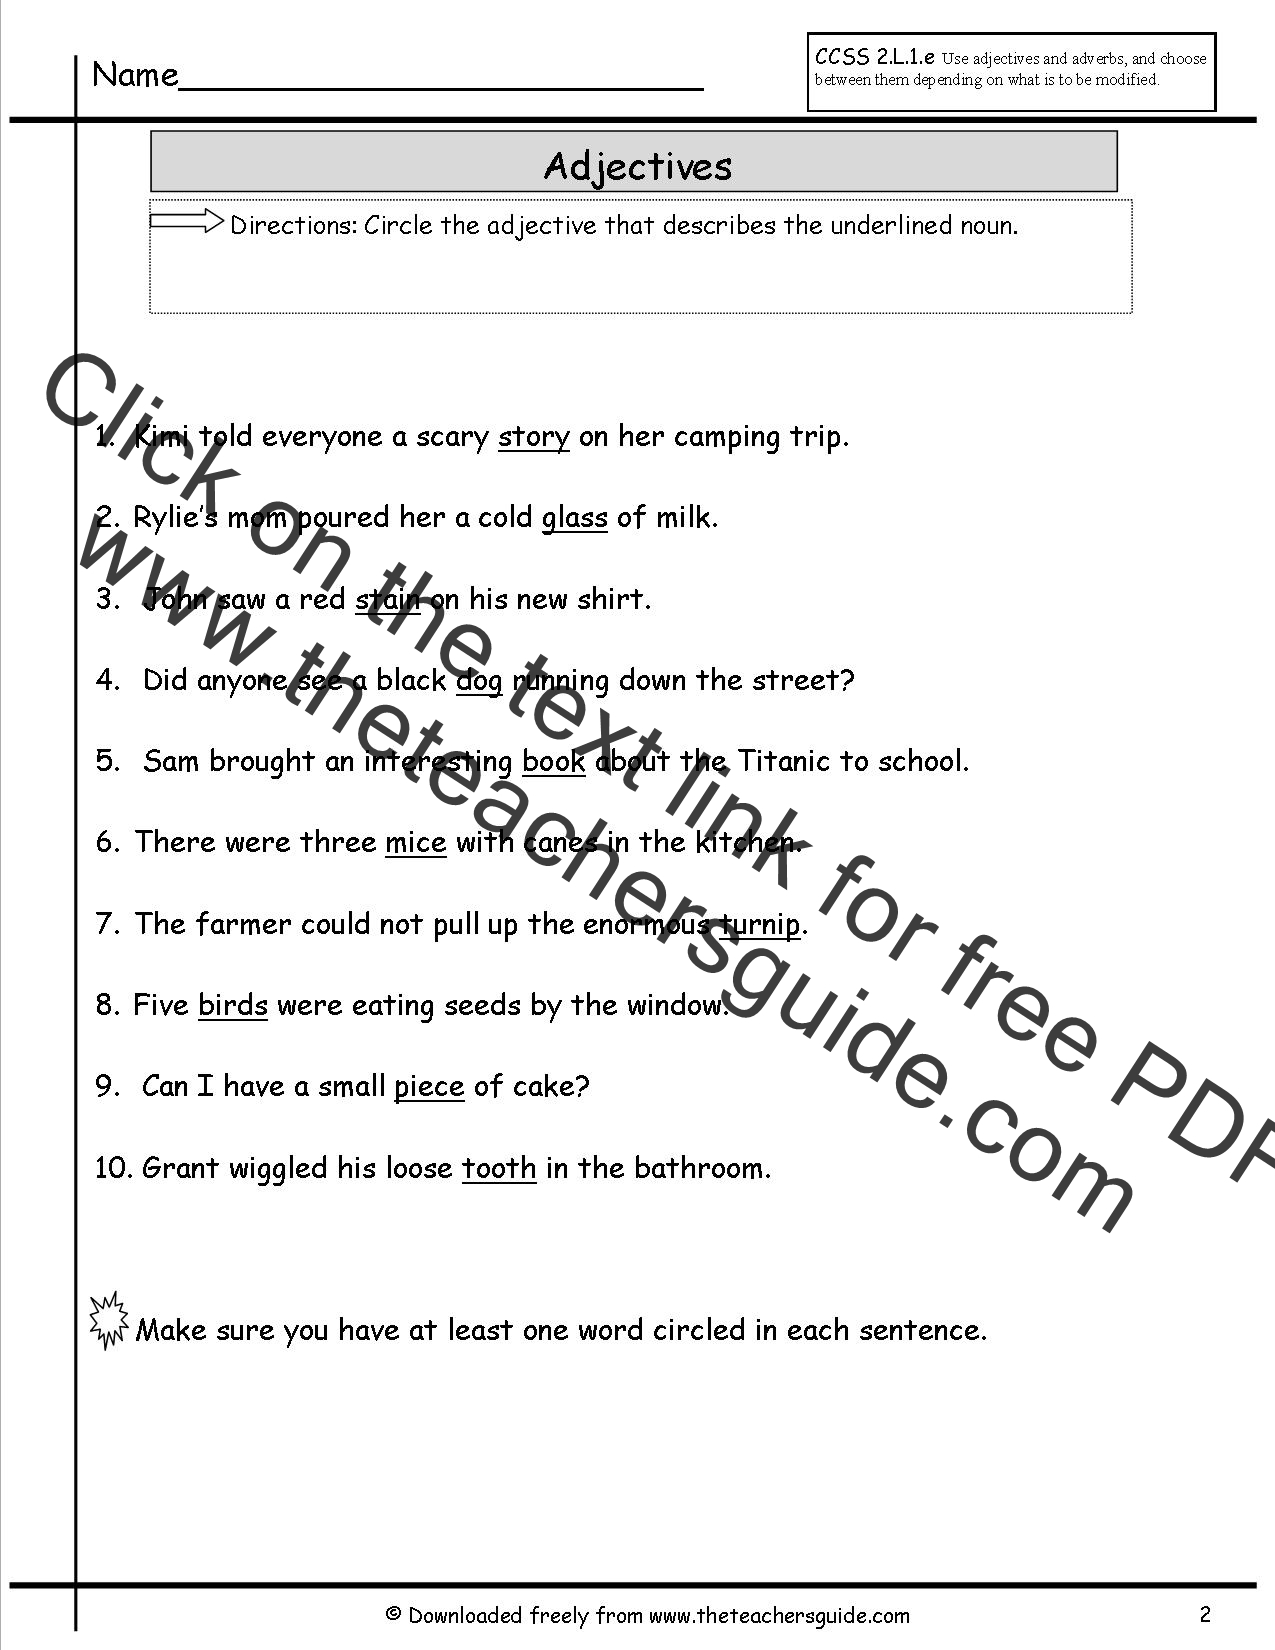 Adjectives Worksheets From The Teacher s Guide